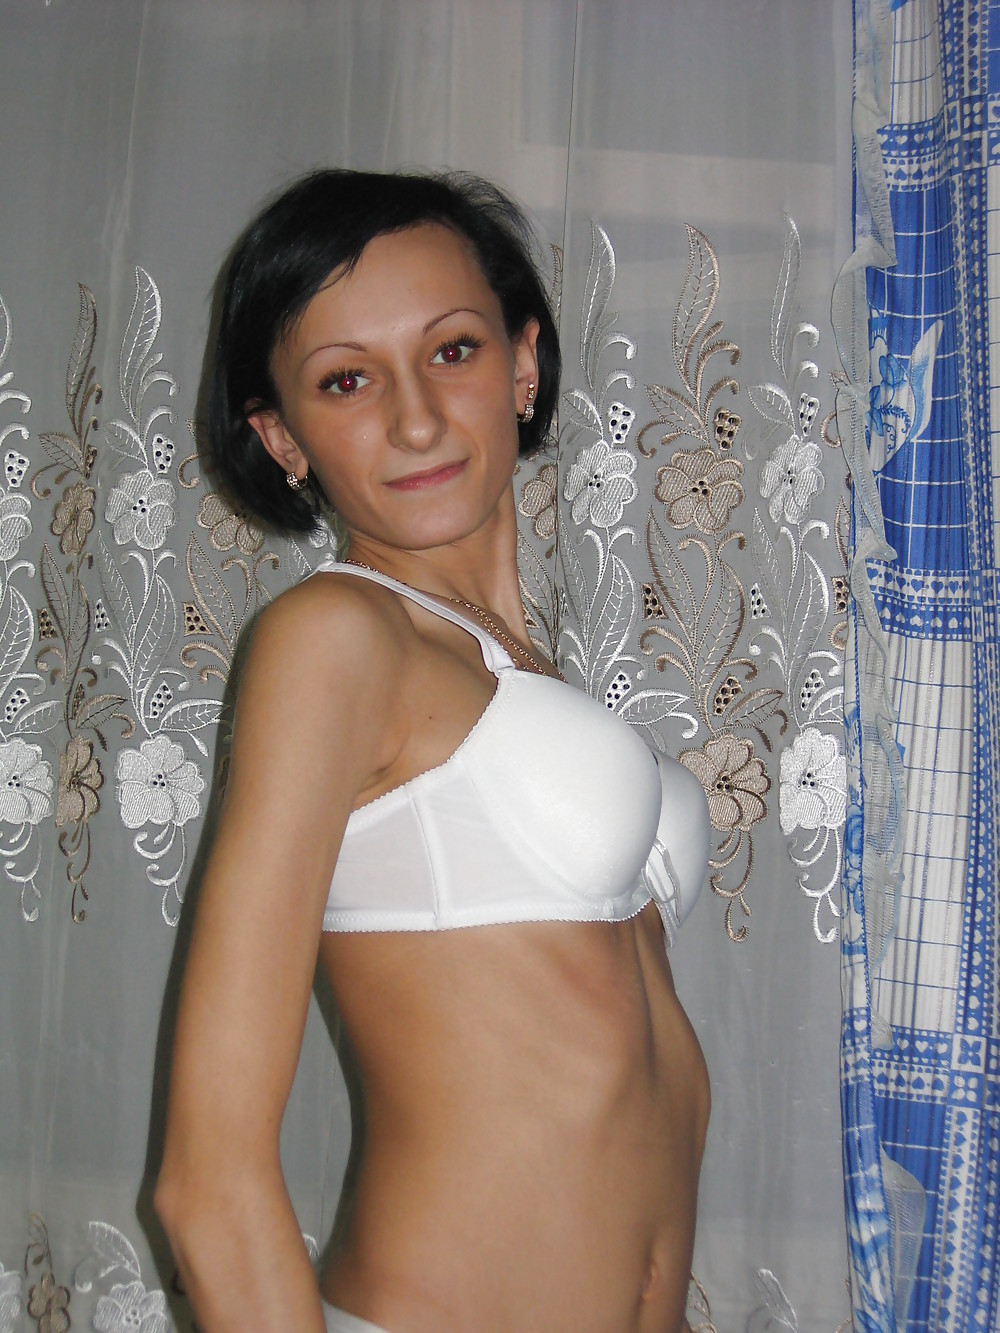 Russian girl (Ksenia) with no tits pict gal